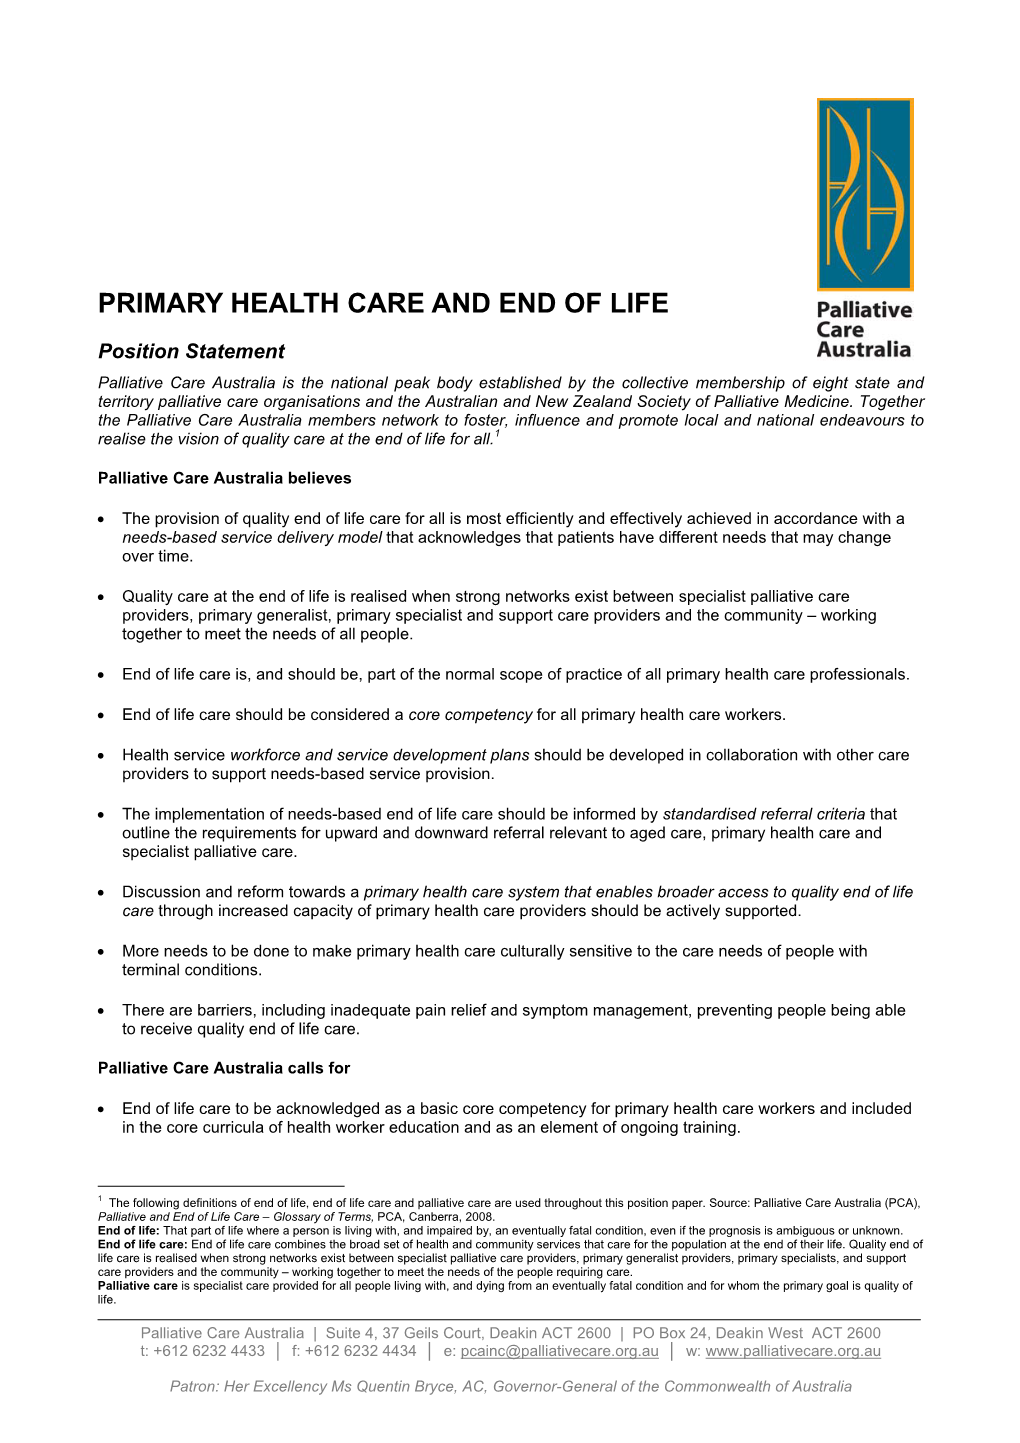 Primary Health Care and End of Life